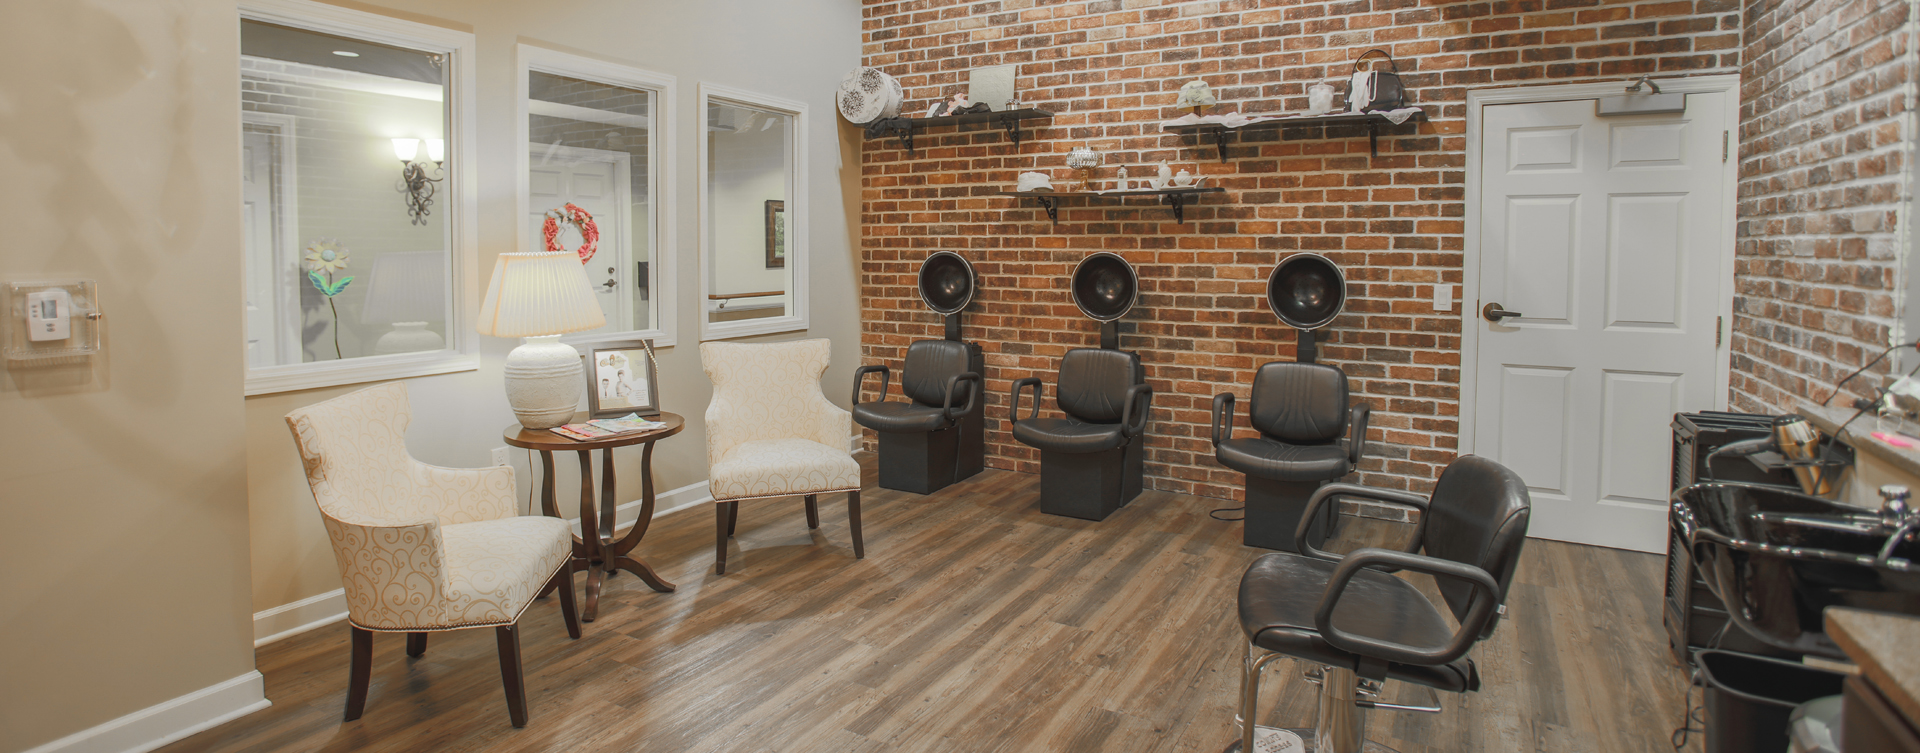 Receive personalized, at-home treatment from our stylist in the salon at Bickford of Carmel